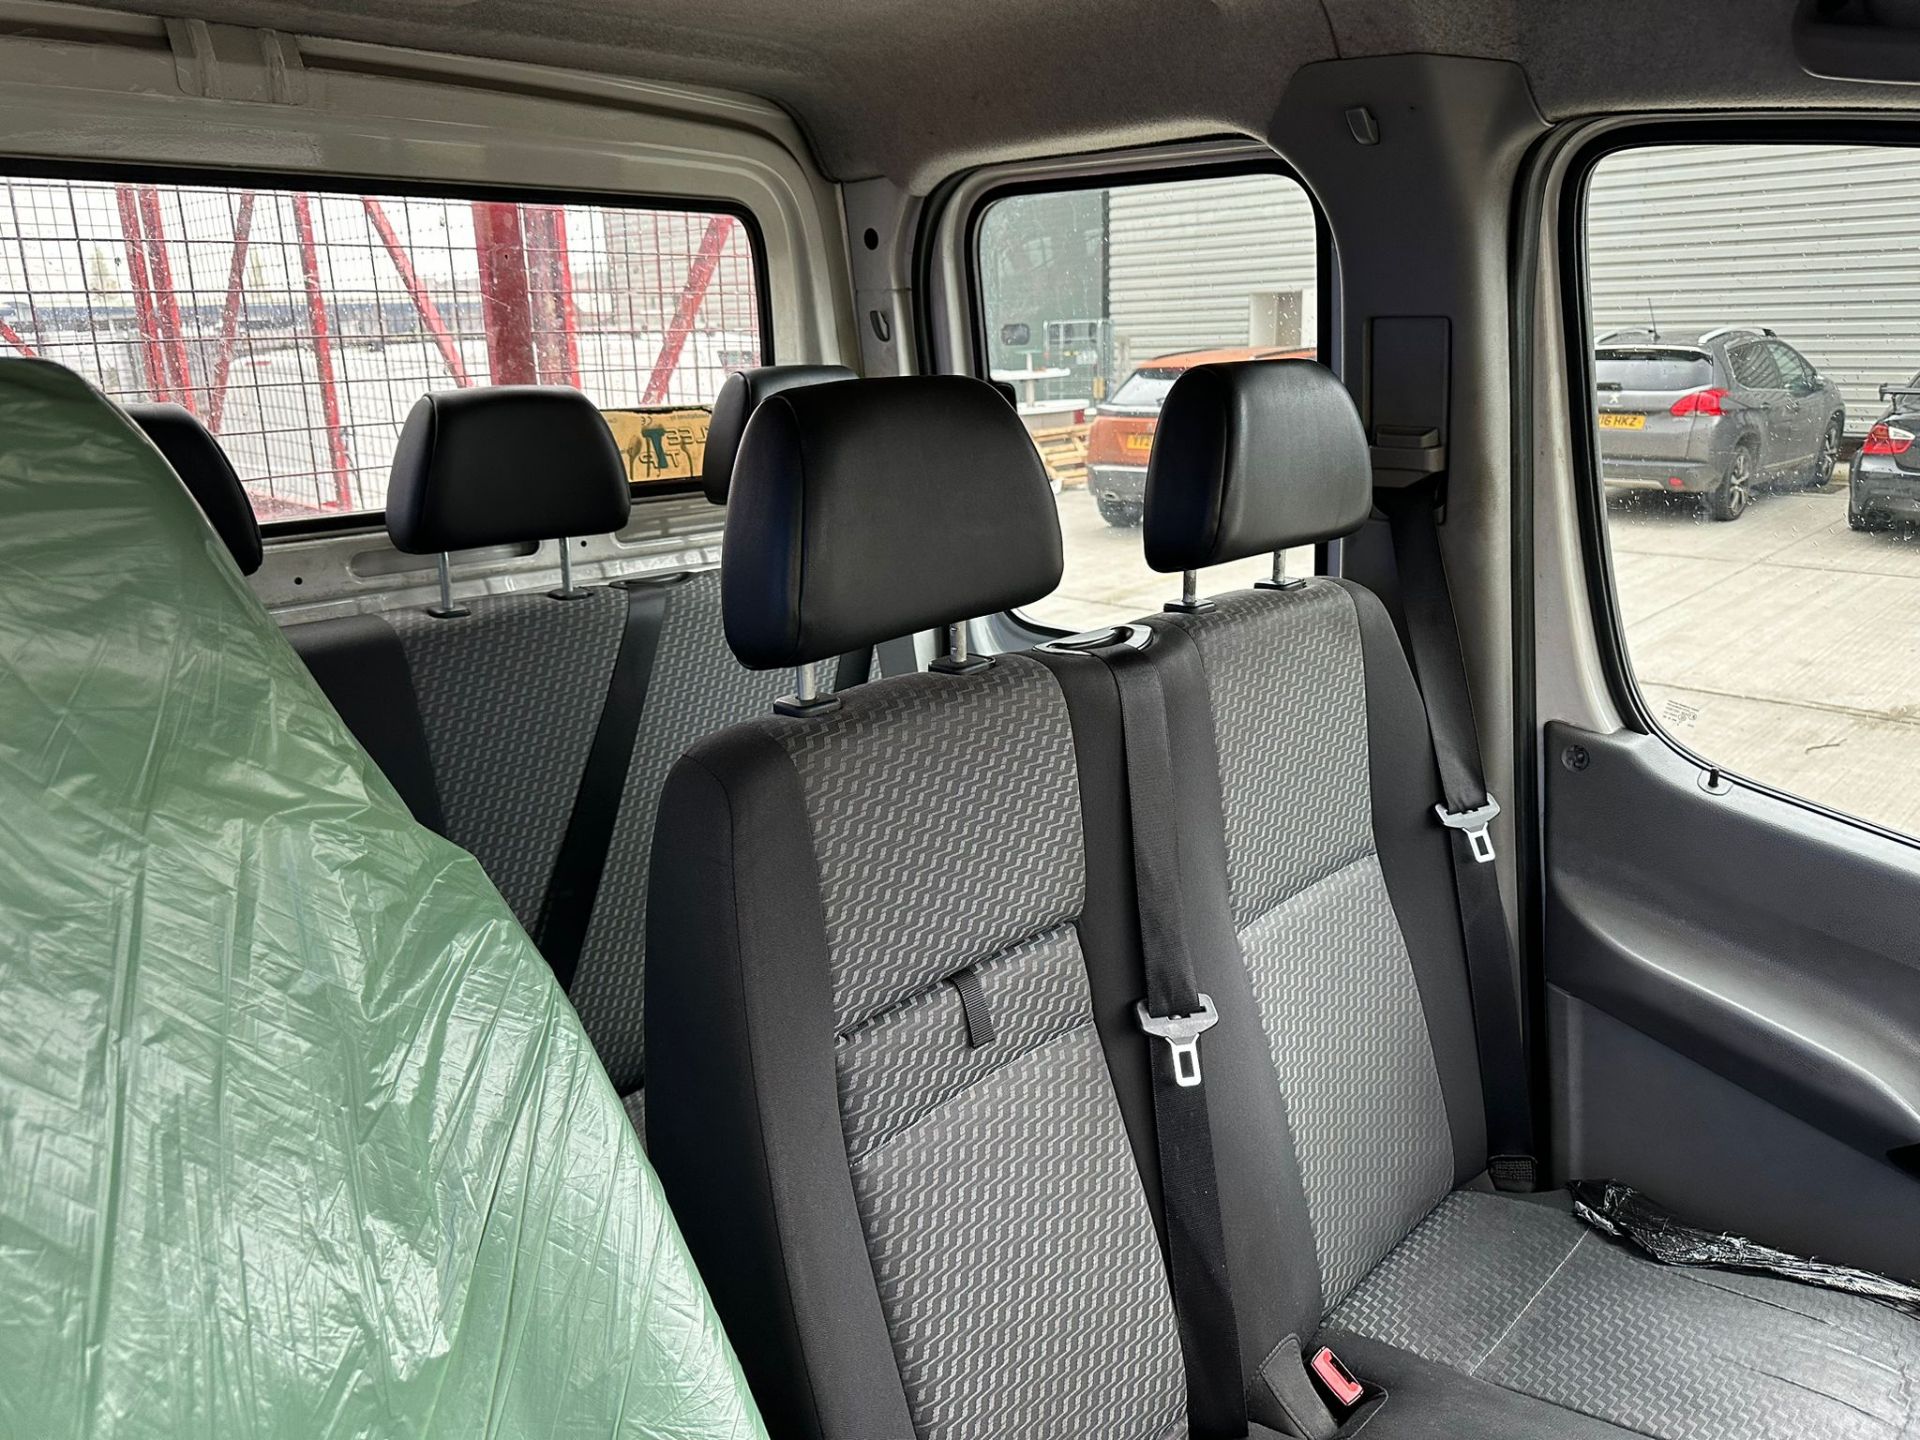 2013 Volkswagen Crafter (Ex Council Fleet Vehicle) Caged Tipper - Image 3 of 40